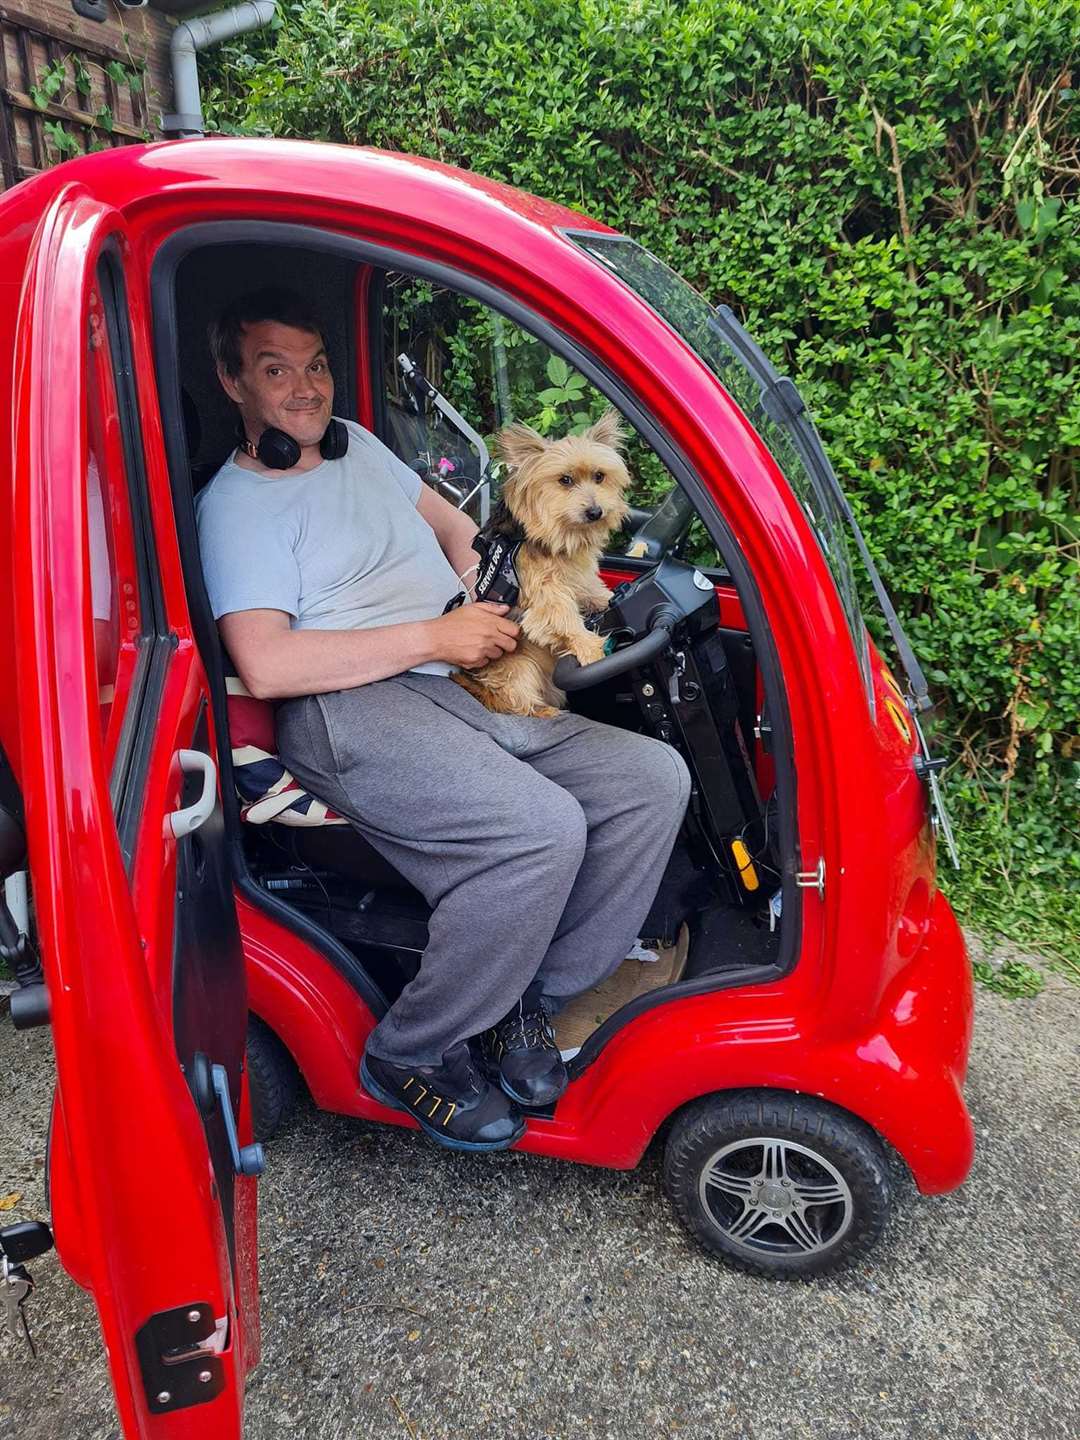 Jimmy Evans, of Wheelz Media, with his assistance dog Benny